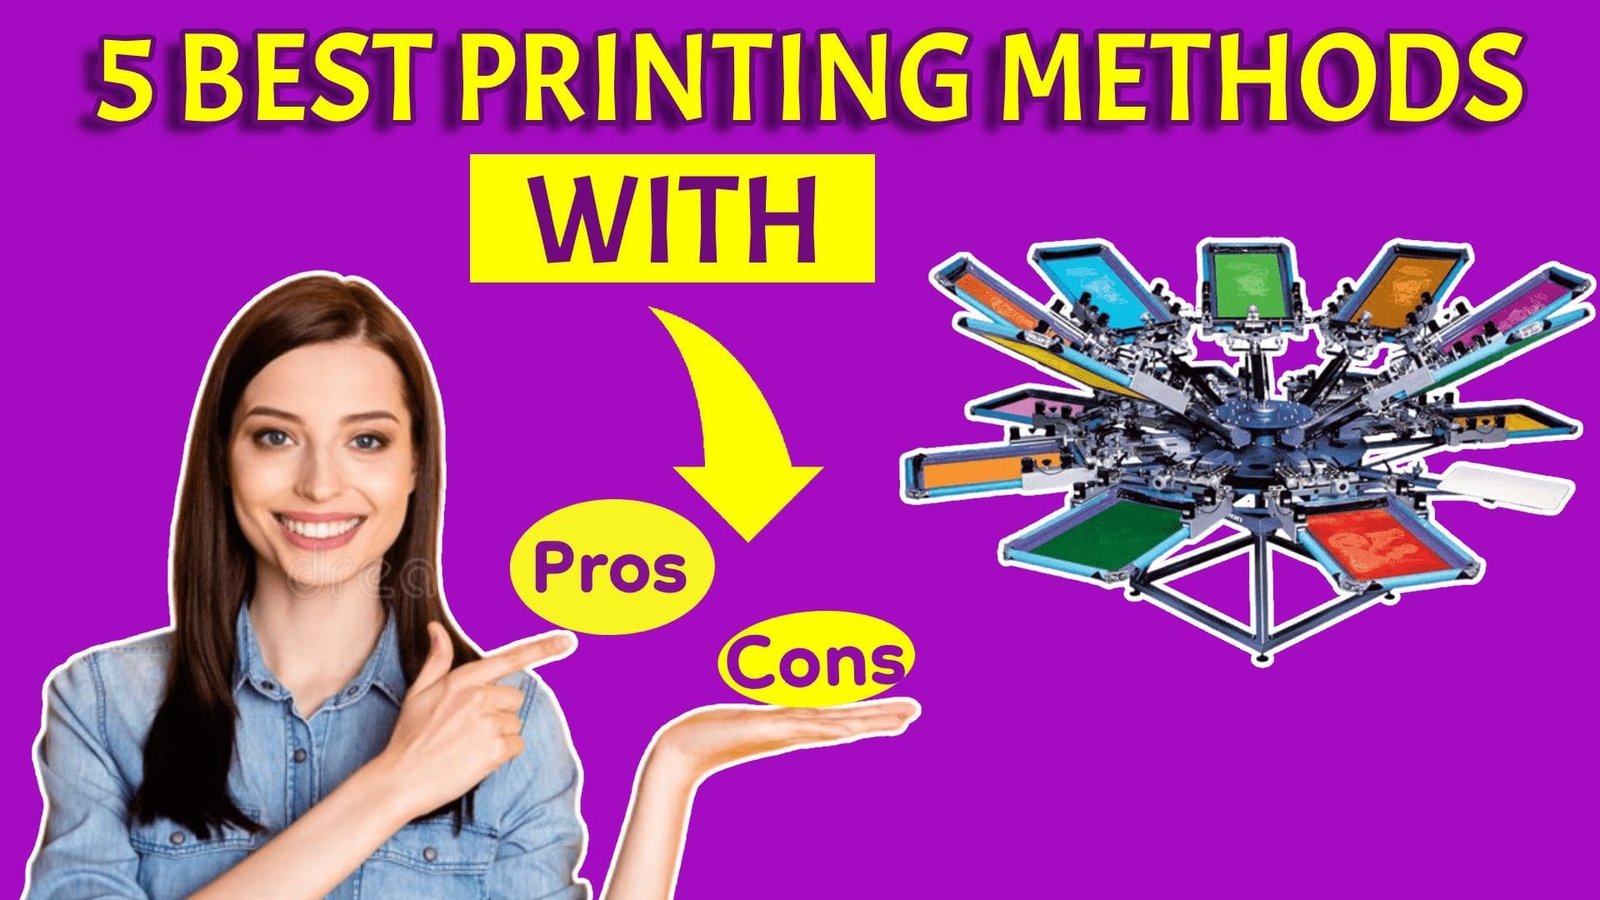 5 best printing methods with pros and cons